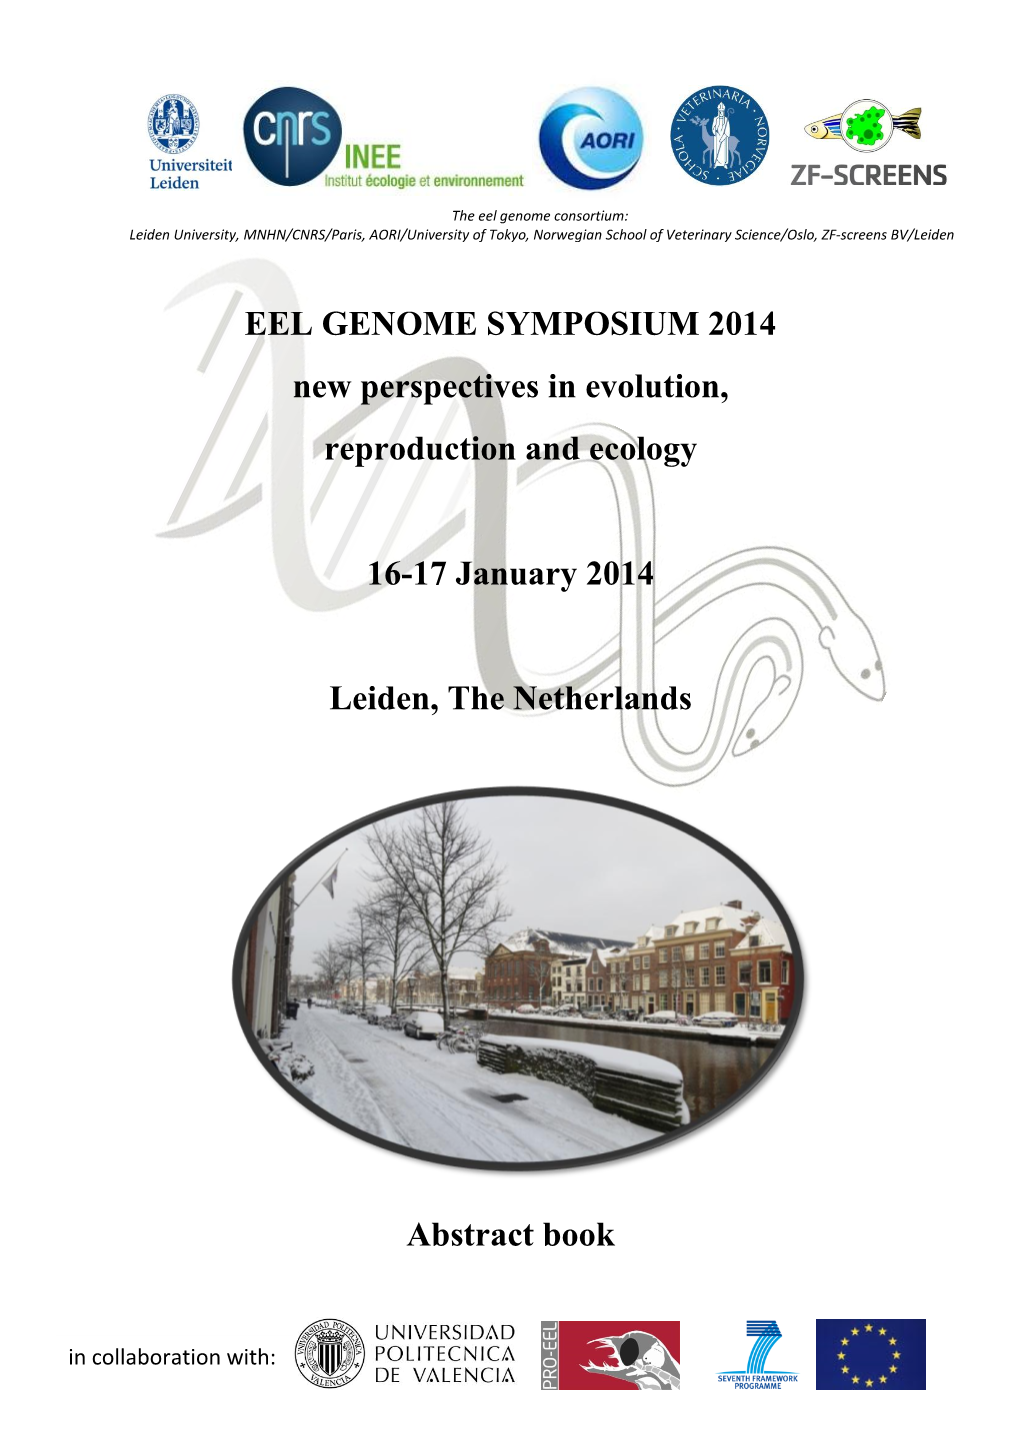 EEL GENOME SYMPOSIUM 2014 New Perspectives in Evolution, Reproduction and Ecology 16-17 January 2014 Leiden, the Netherlands